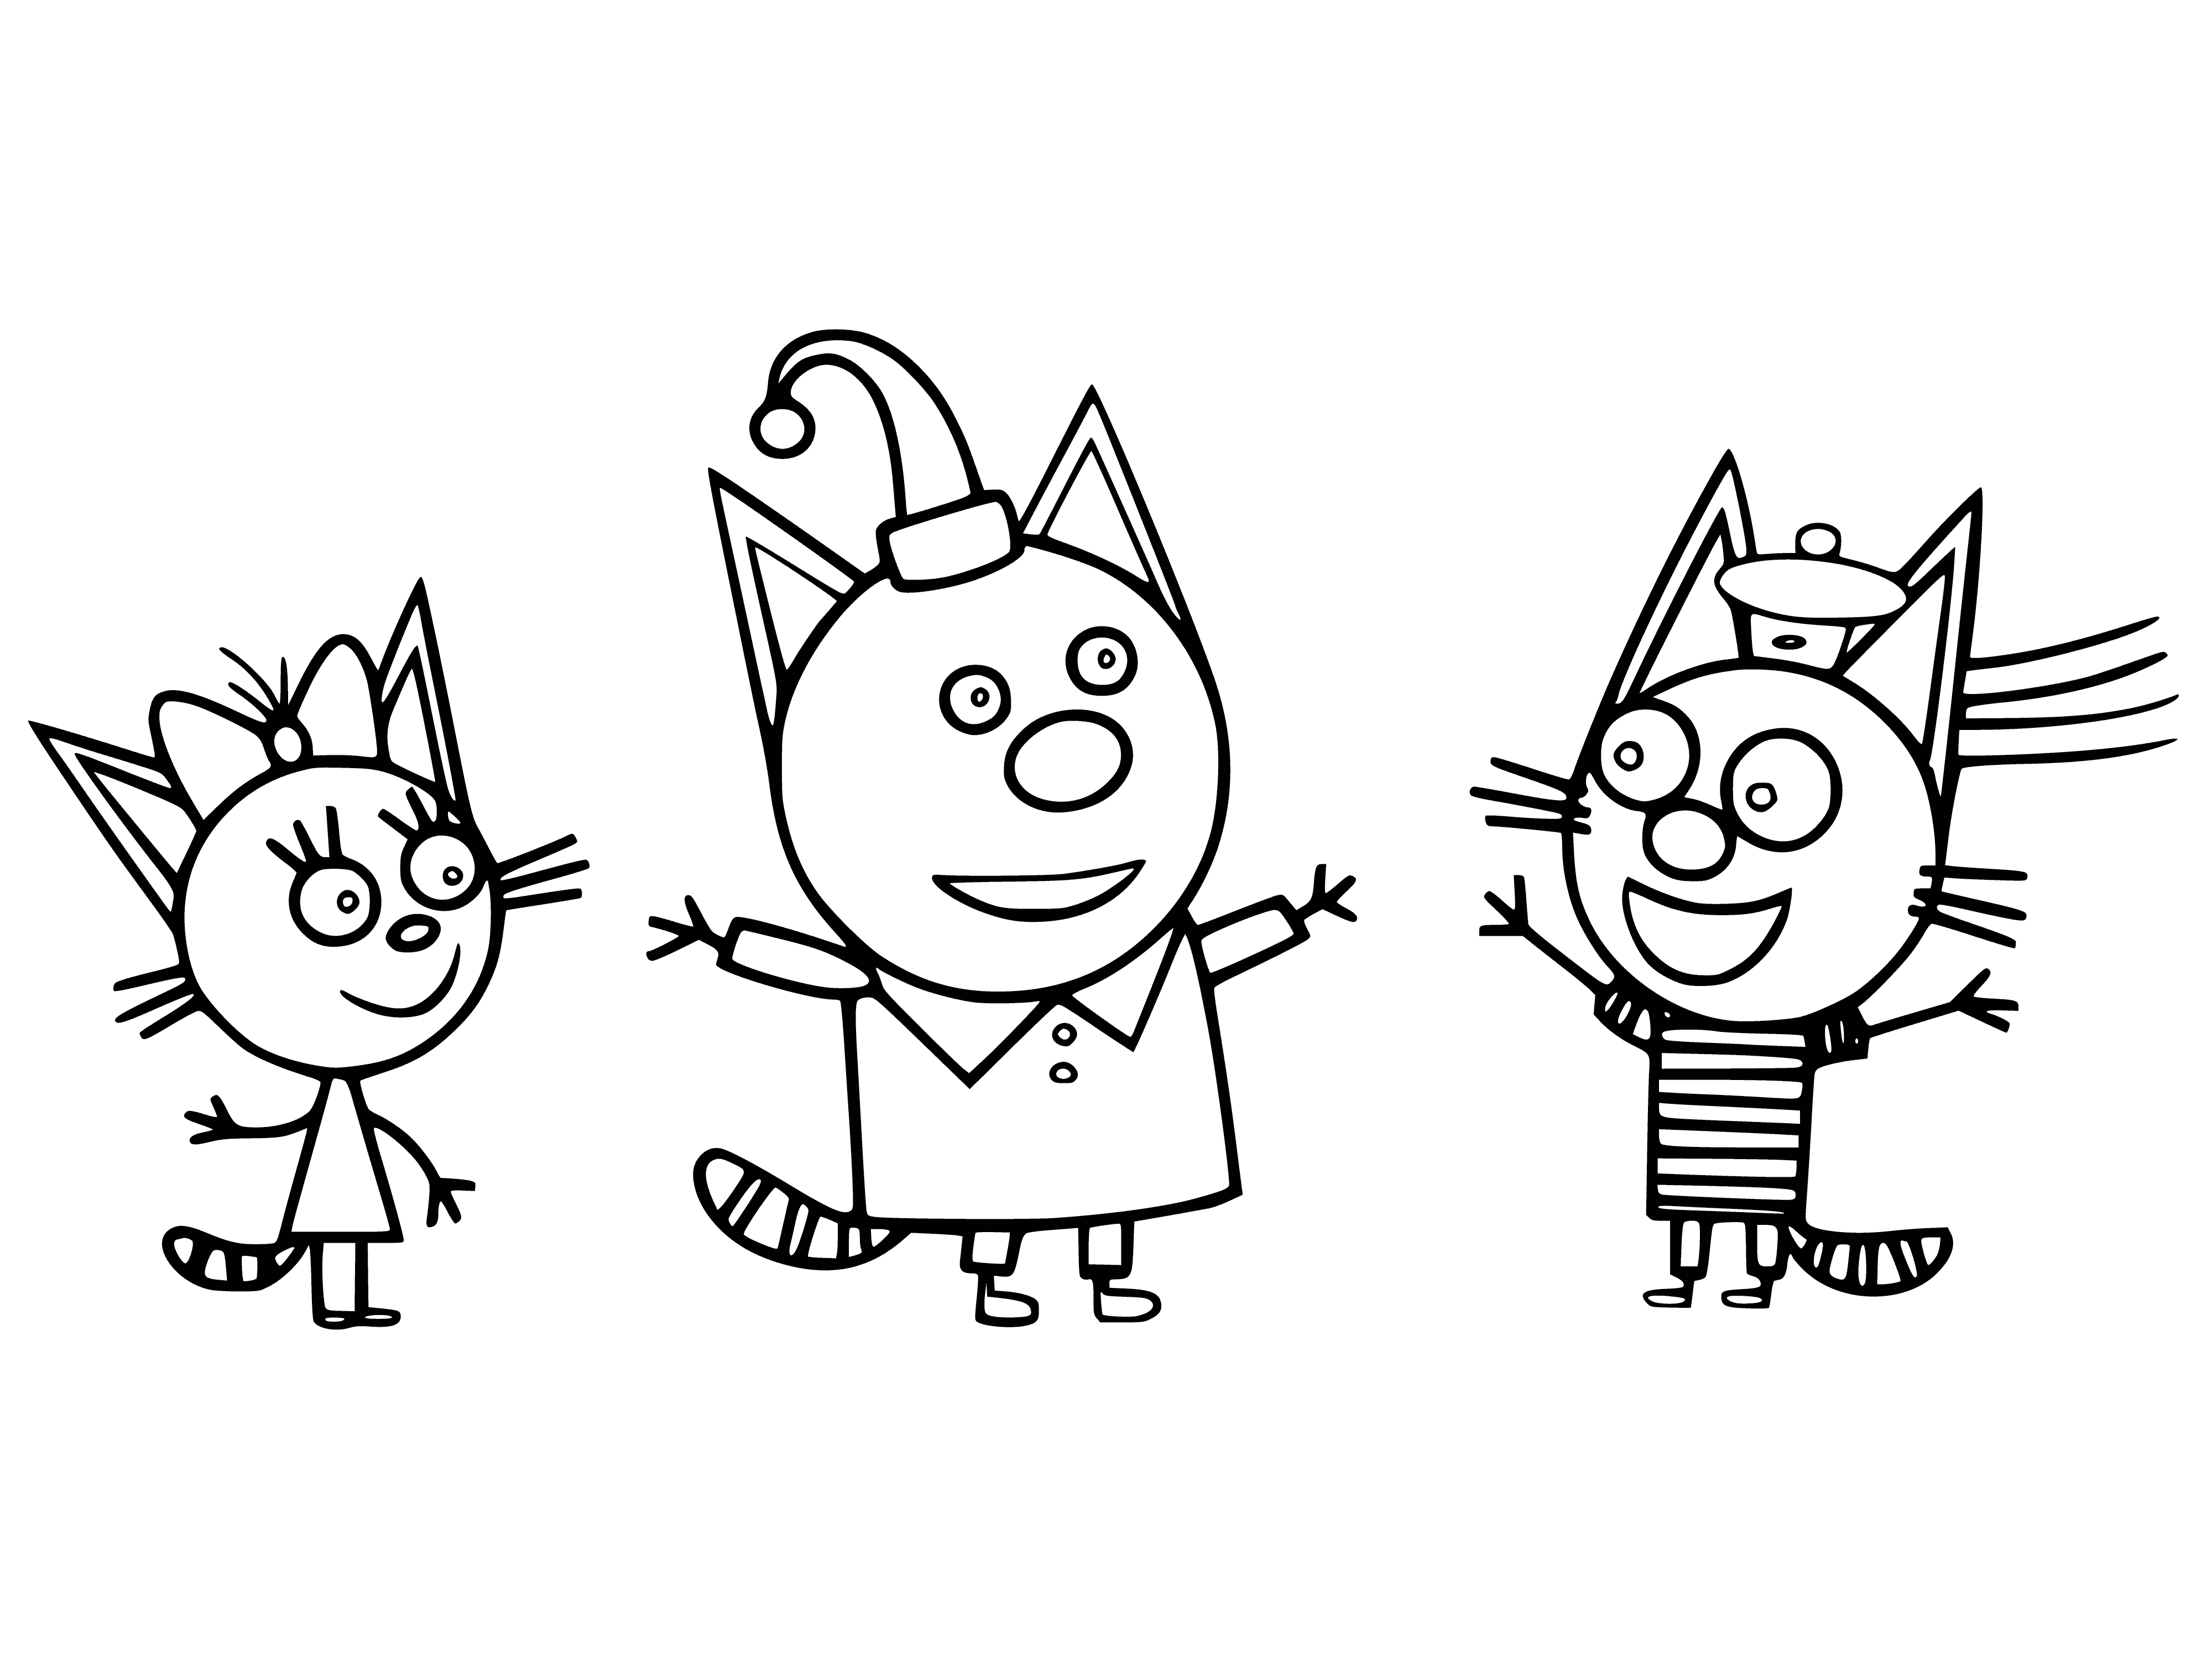 coloring page: 3 cats in a row: Caramel (tabby), Compote (tuxedo), and Tortilla (tortoiseshell) looking at camera, to side, down, respectively with their tails up.